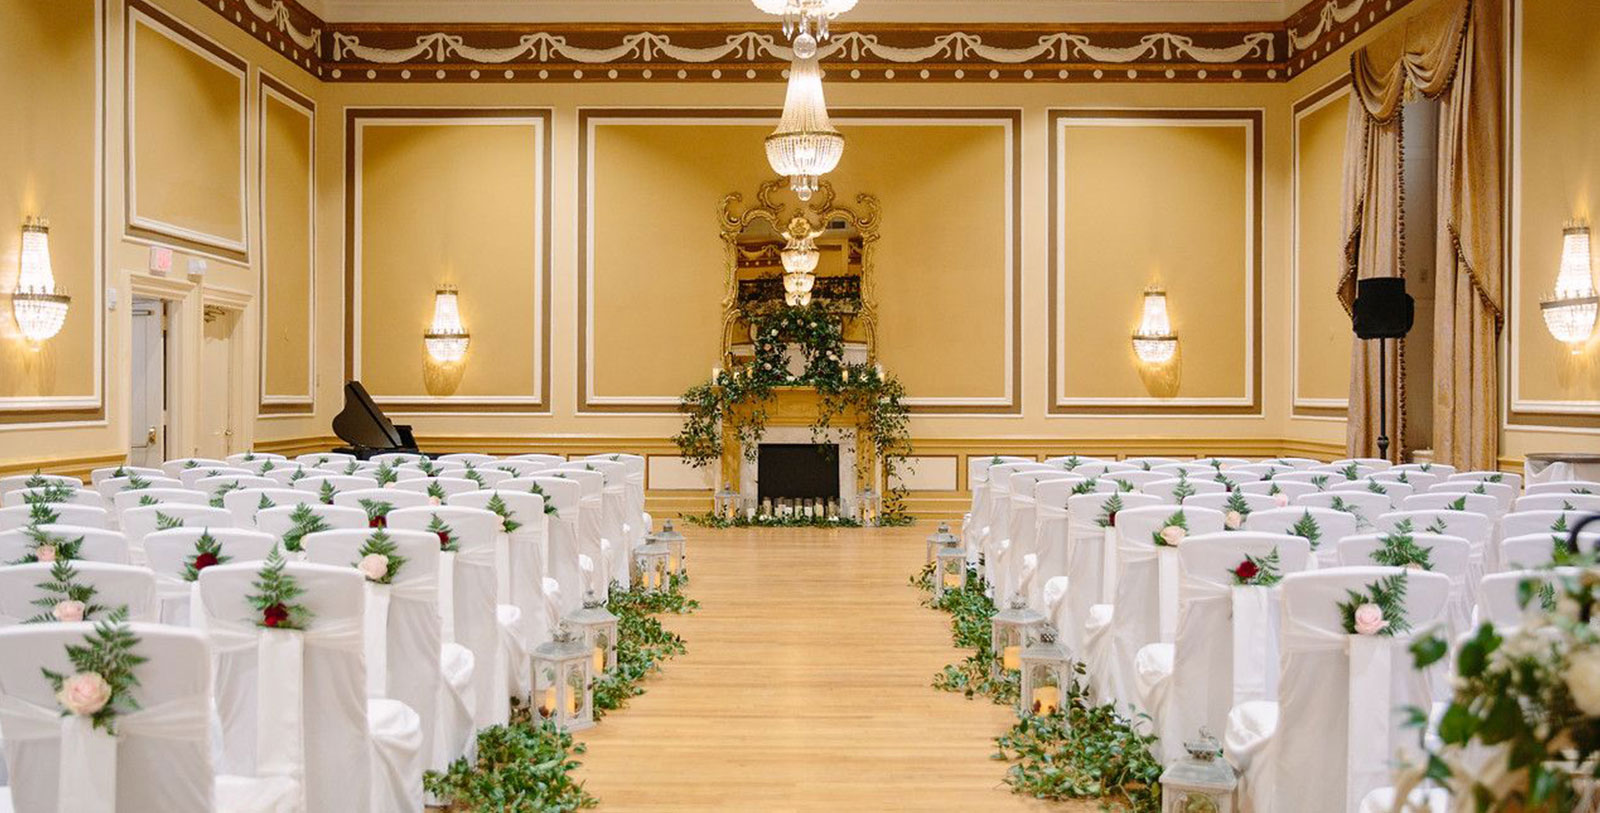 Image of Colonial Ballroom setup for a Wedding, Francis Marion Hotel, 1924, Member of Historic Hotels of America, in Charleston, South Carolina, Request for Proposal